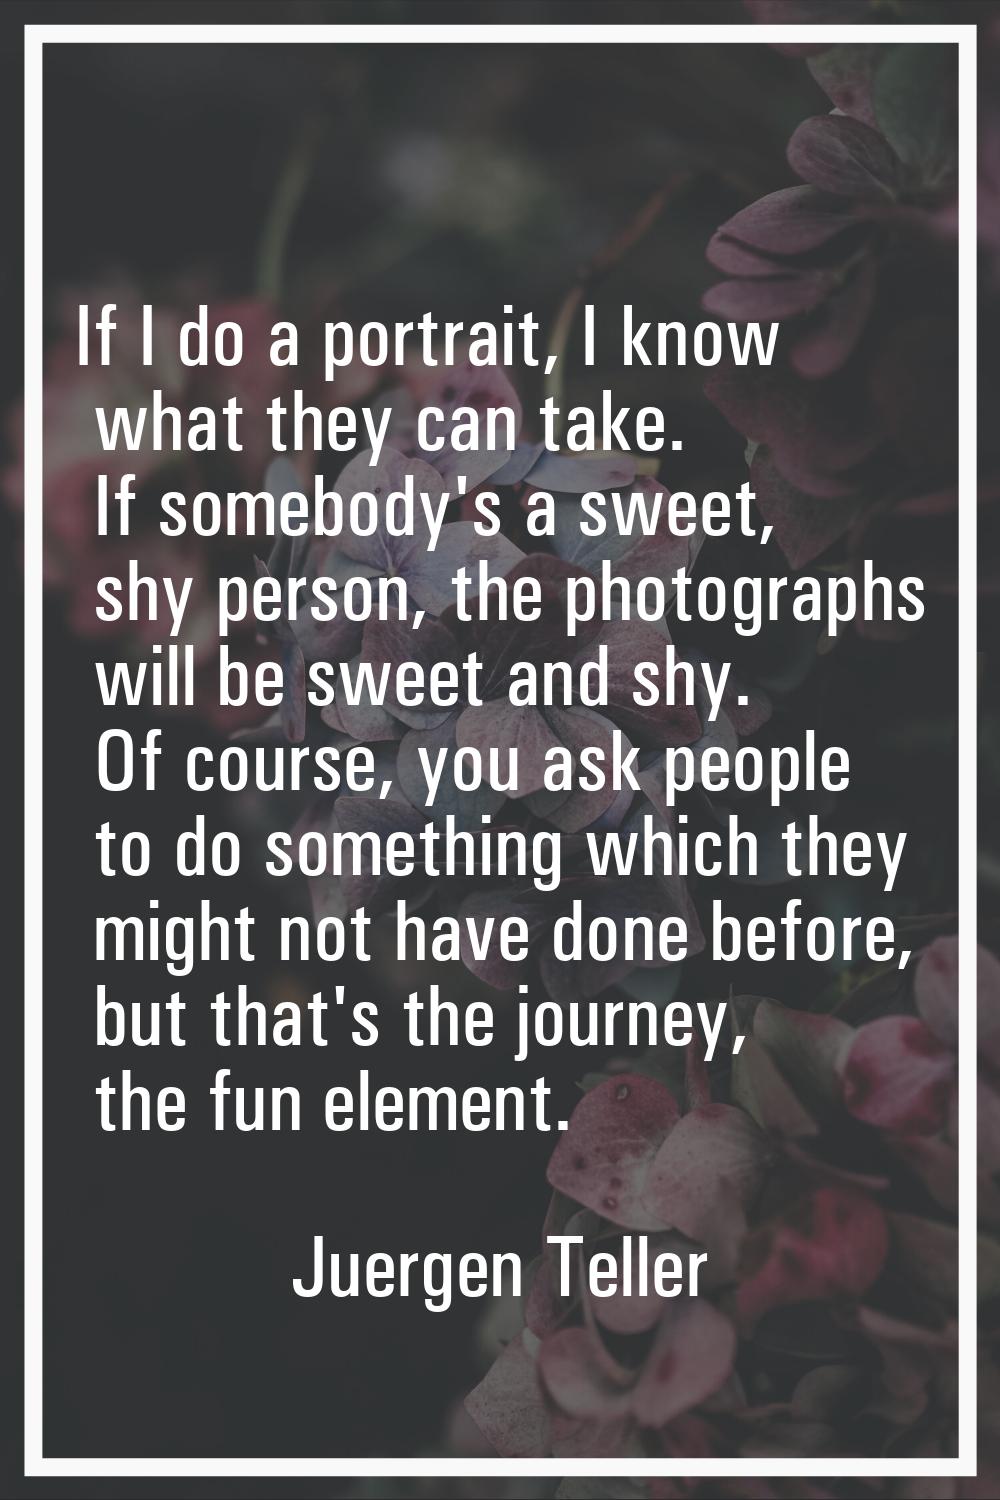 If I do a portrait, I know what they can take. If somebody's a sweet, shy person, the photographs w